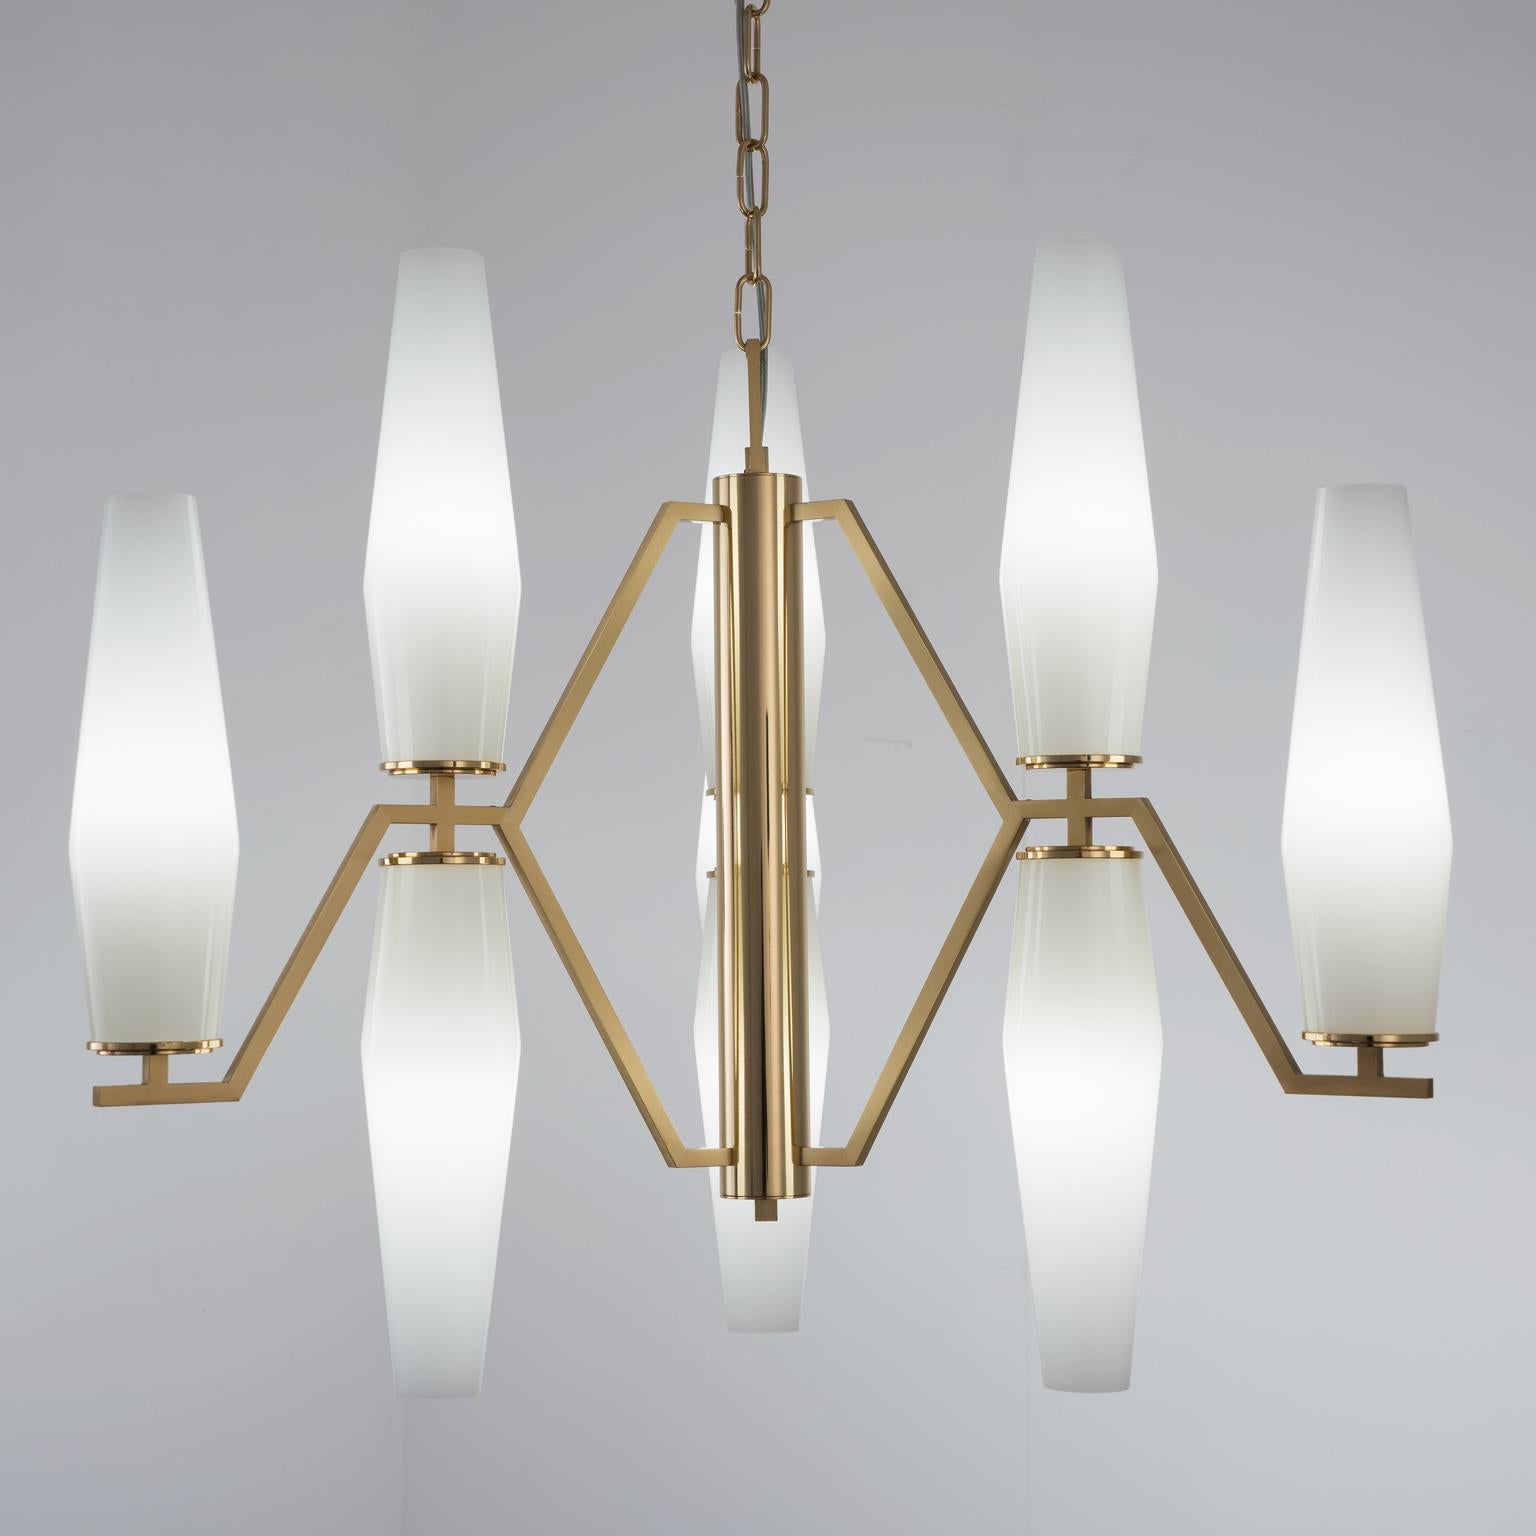 A chandelier with a sober and discreet elegance. Devoid of any concessions to decorations, hence capable of resonating both in Classic and modern contexts. It combines strength and grace, with coexisting smooth and angular lines, just like Frida